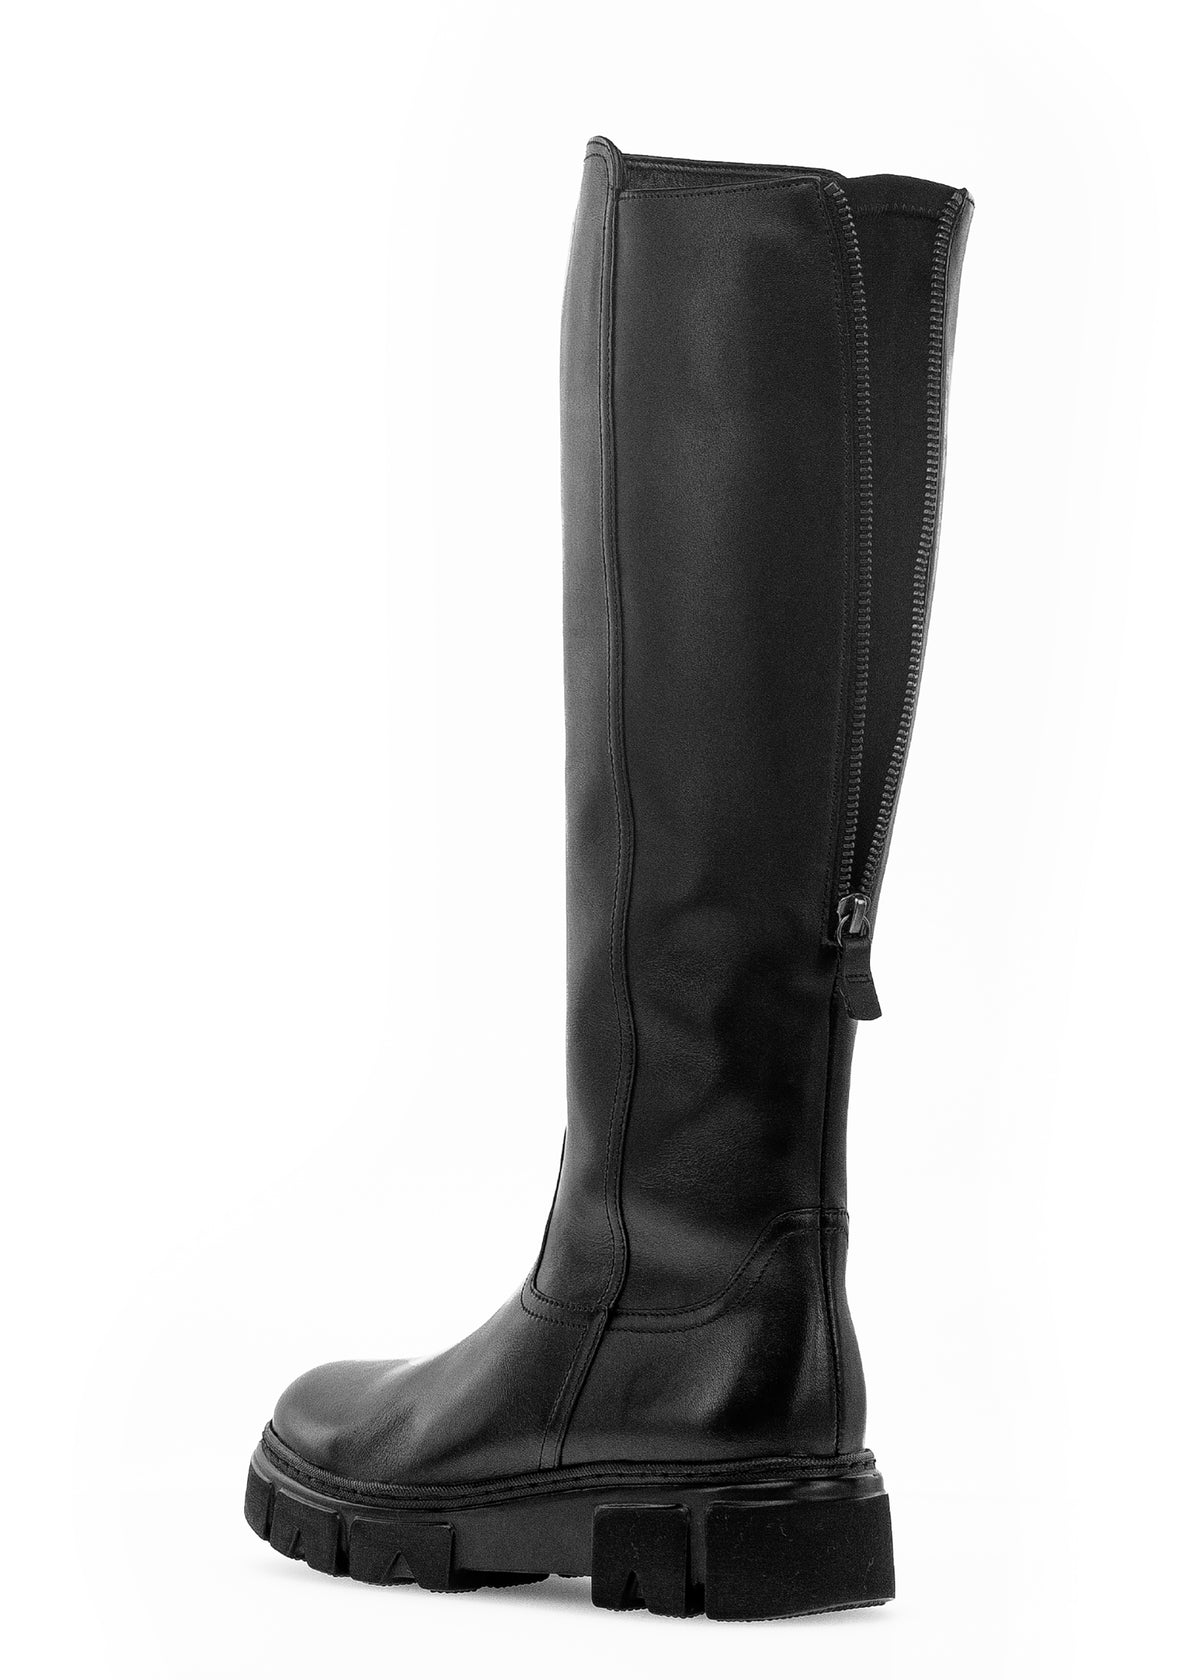 Boots with a thick sole - black, adjustable ML shaft